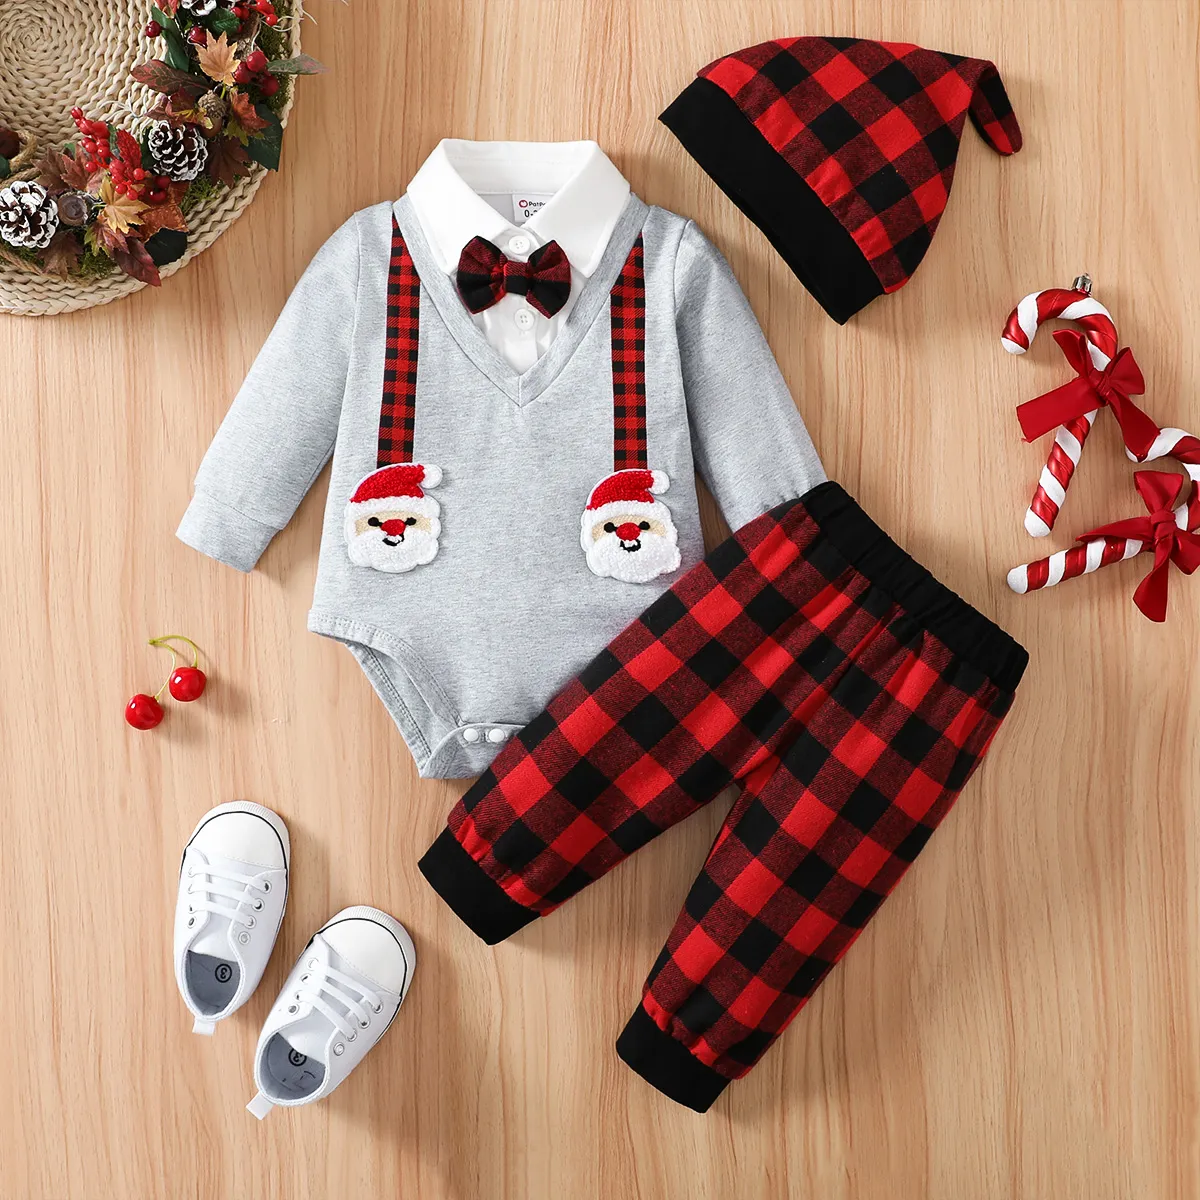 Christmas 3pcs Baby Boy 95% Cotton Long-sleeve Santa Badge Bow Tie Romper and Red Plaid Pants with Hat Set  big image 1